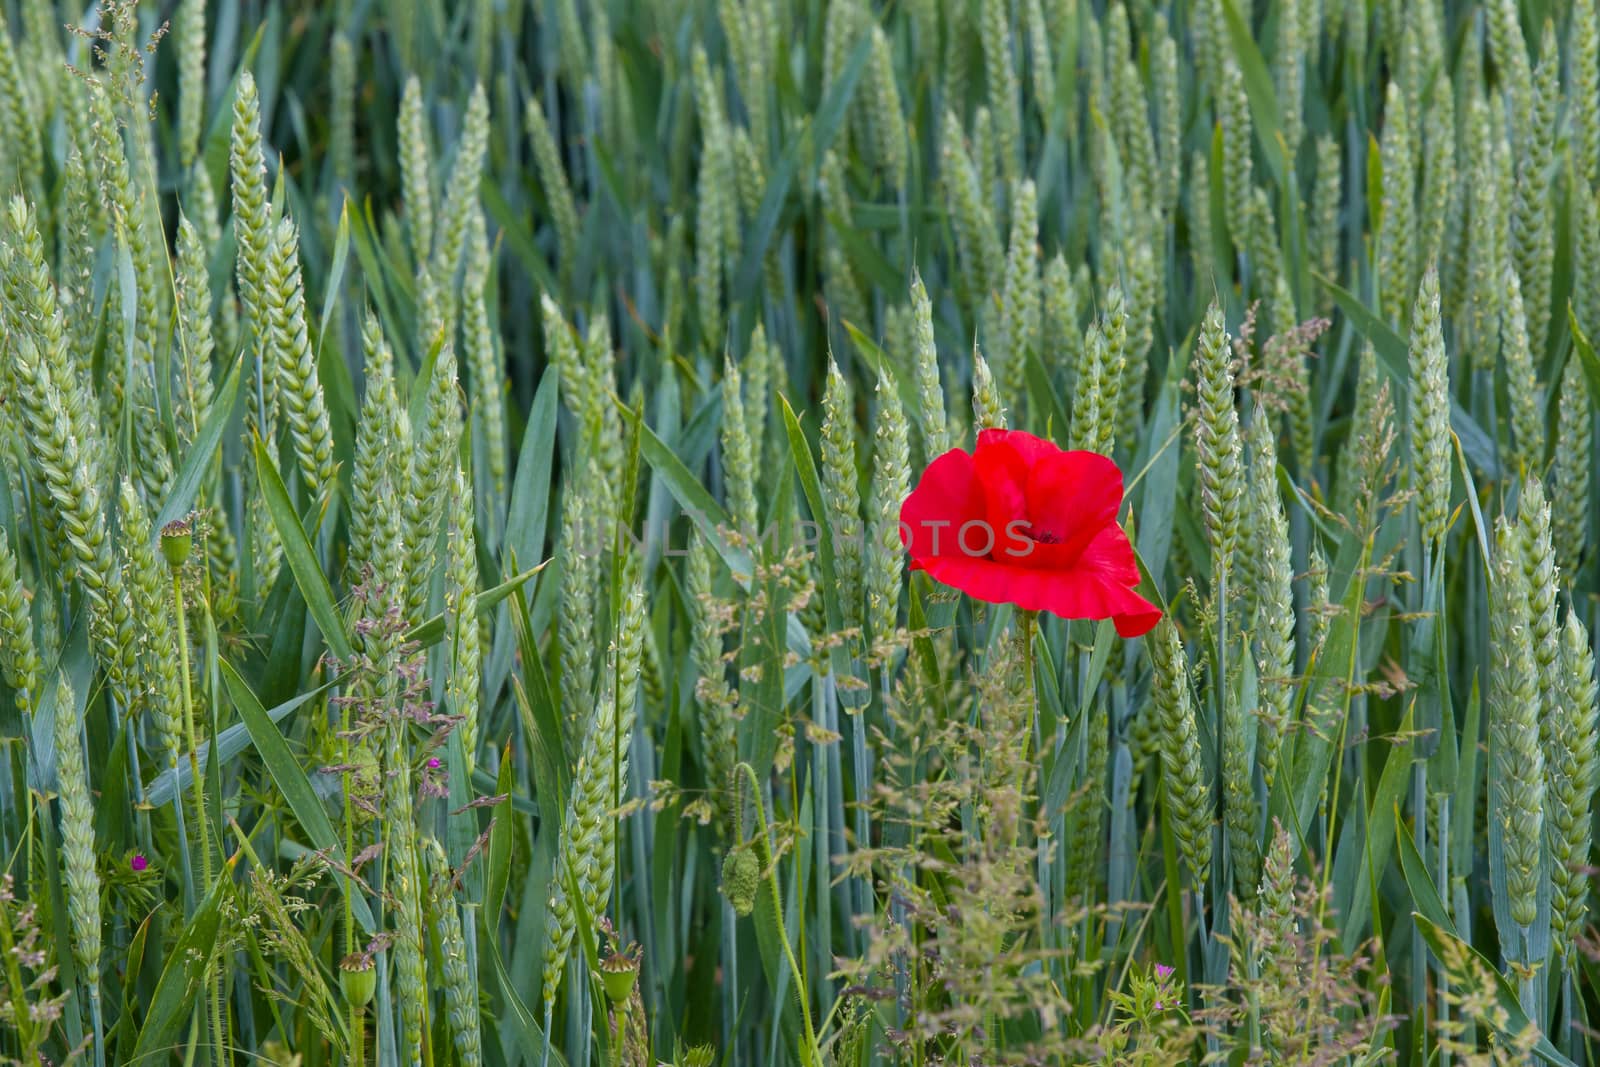 Lone poppy growing in wheat field in East Sussex, England. Shown on right of image.